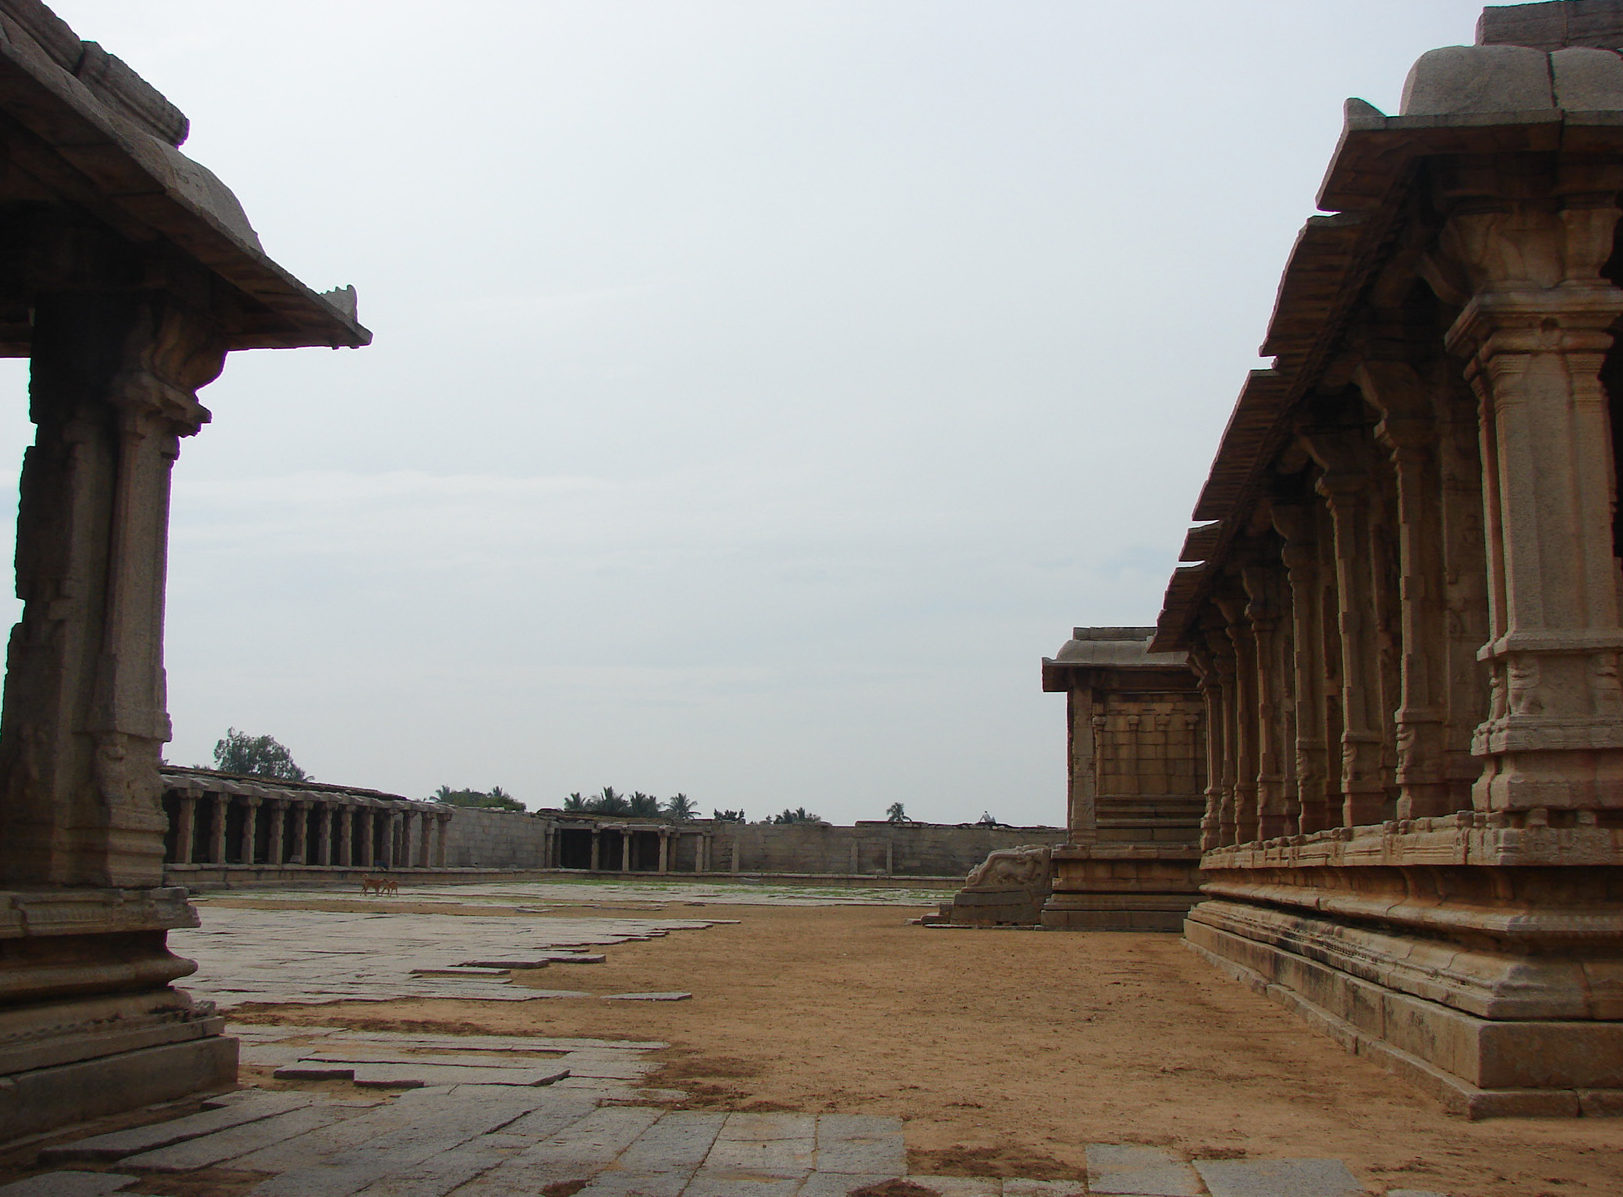 Another view - Pattabhirama temple